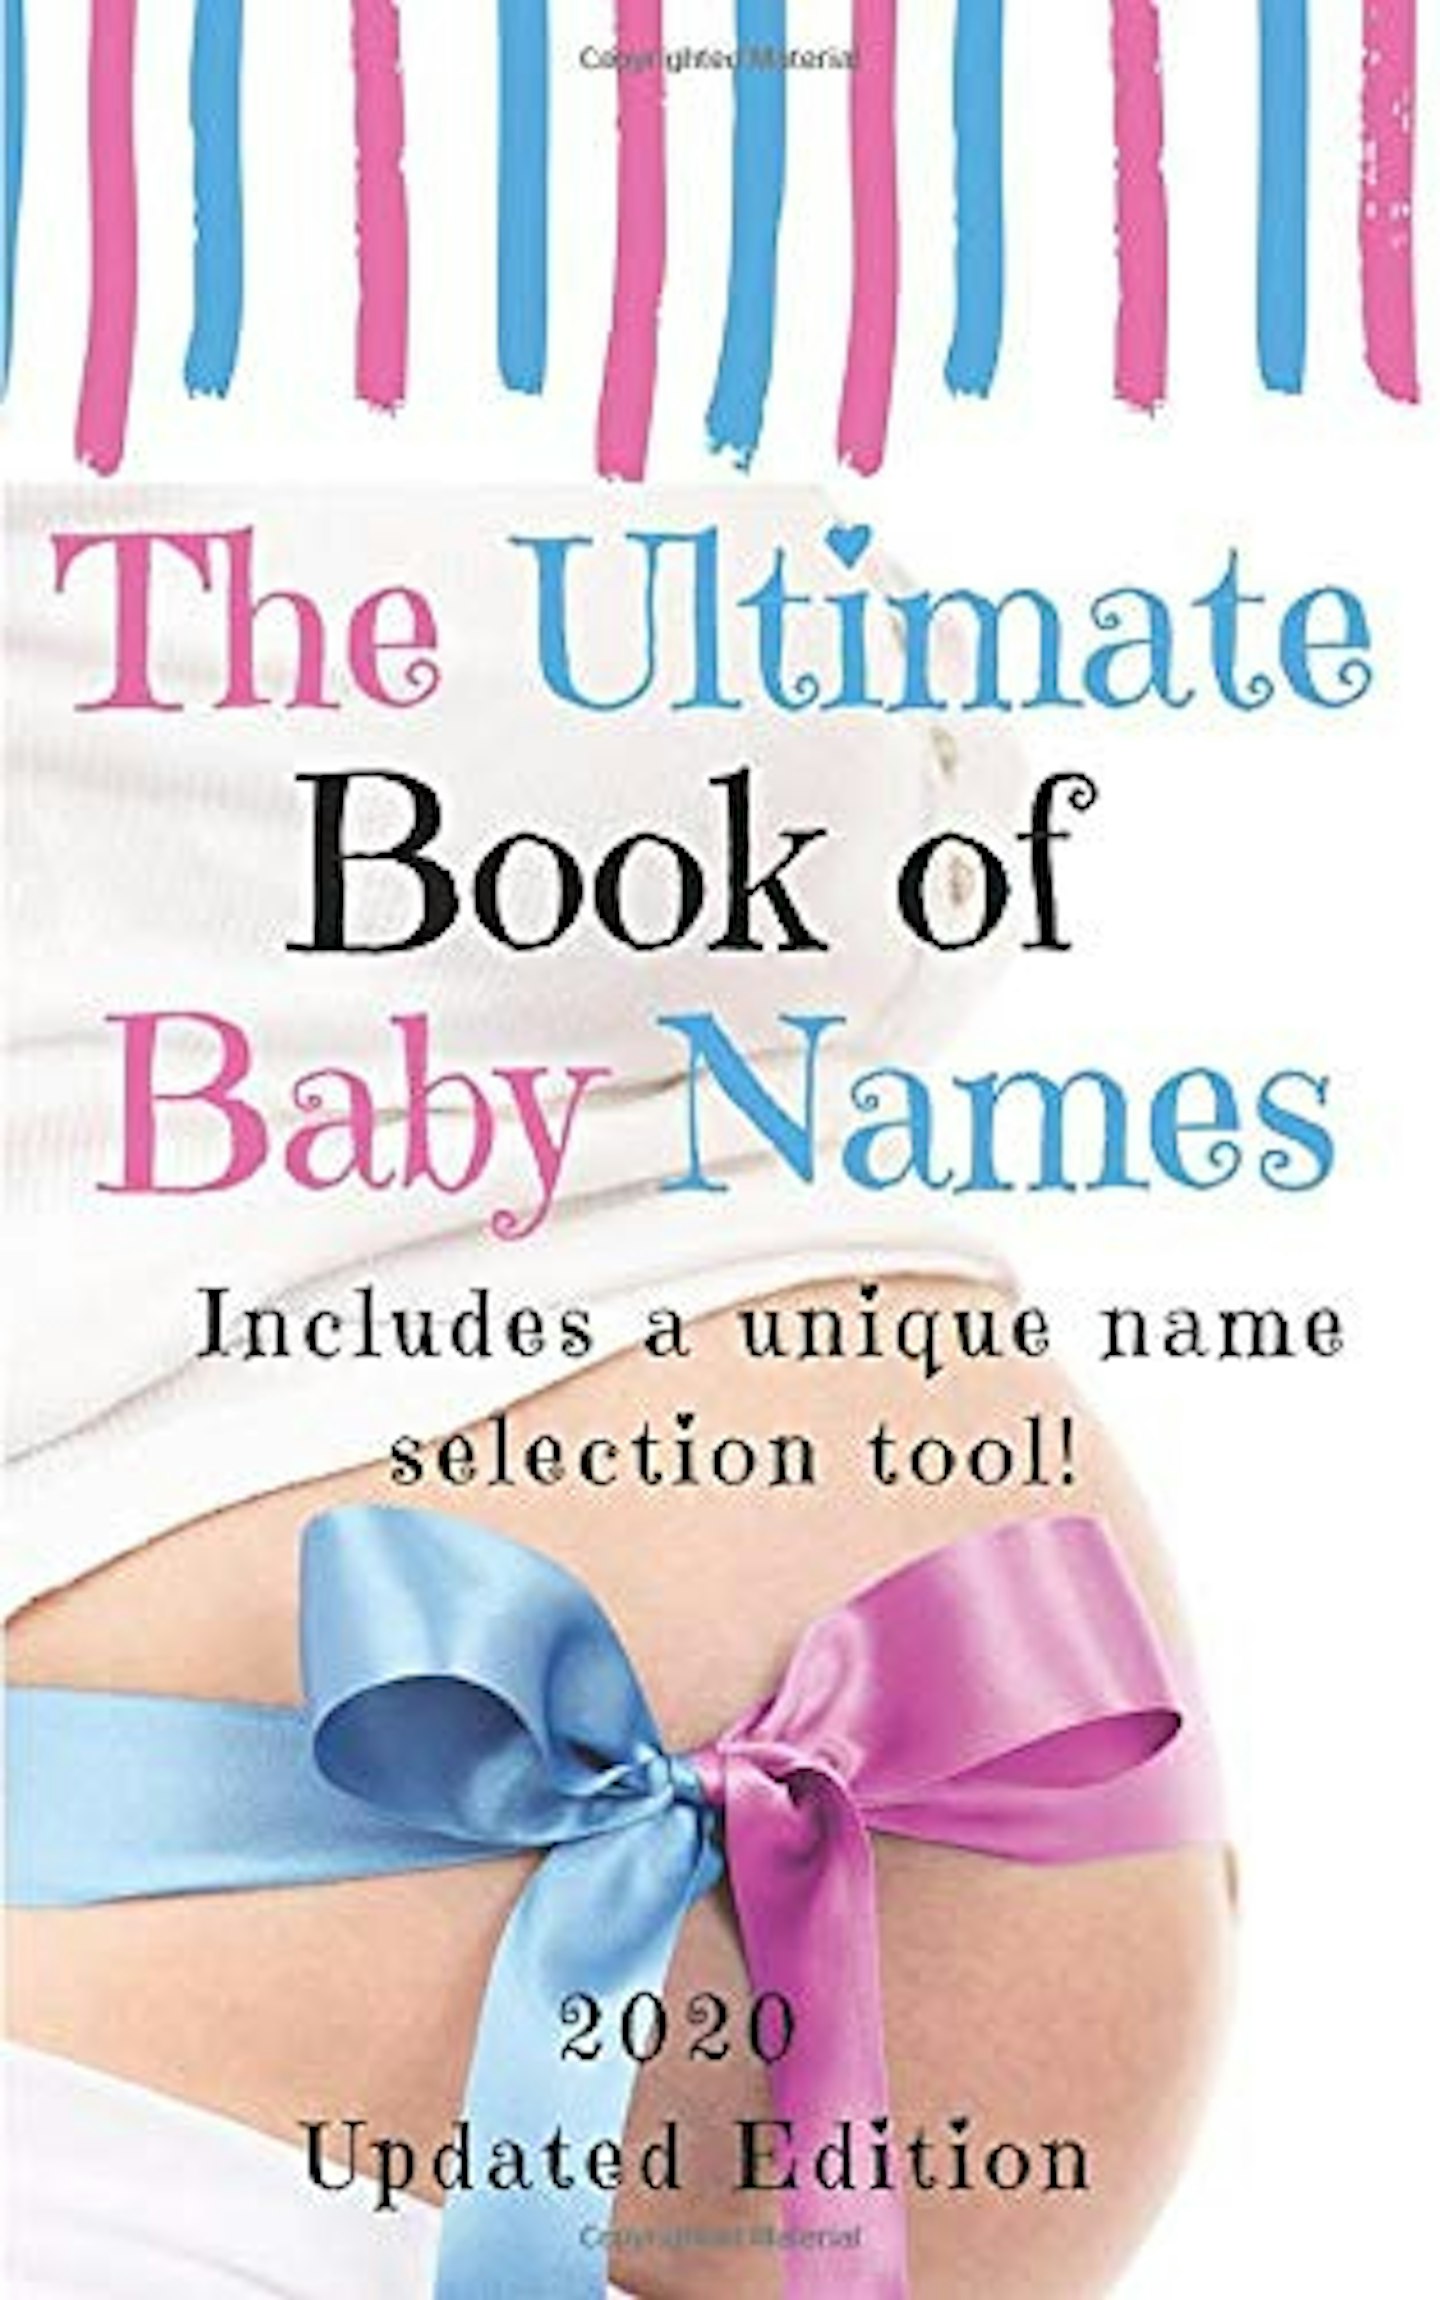 The Ultimate Book of Baby Names